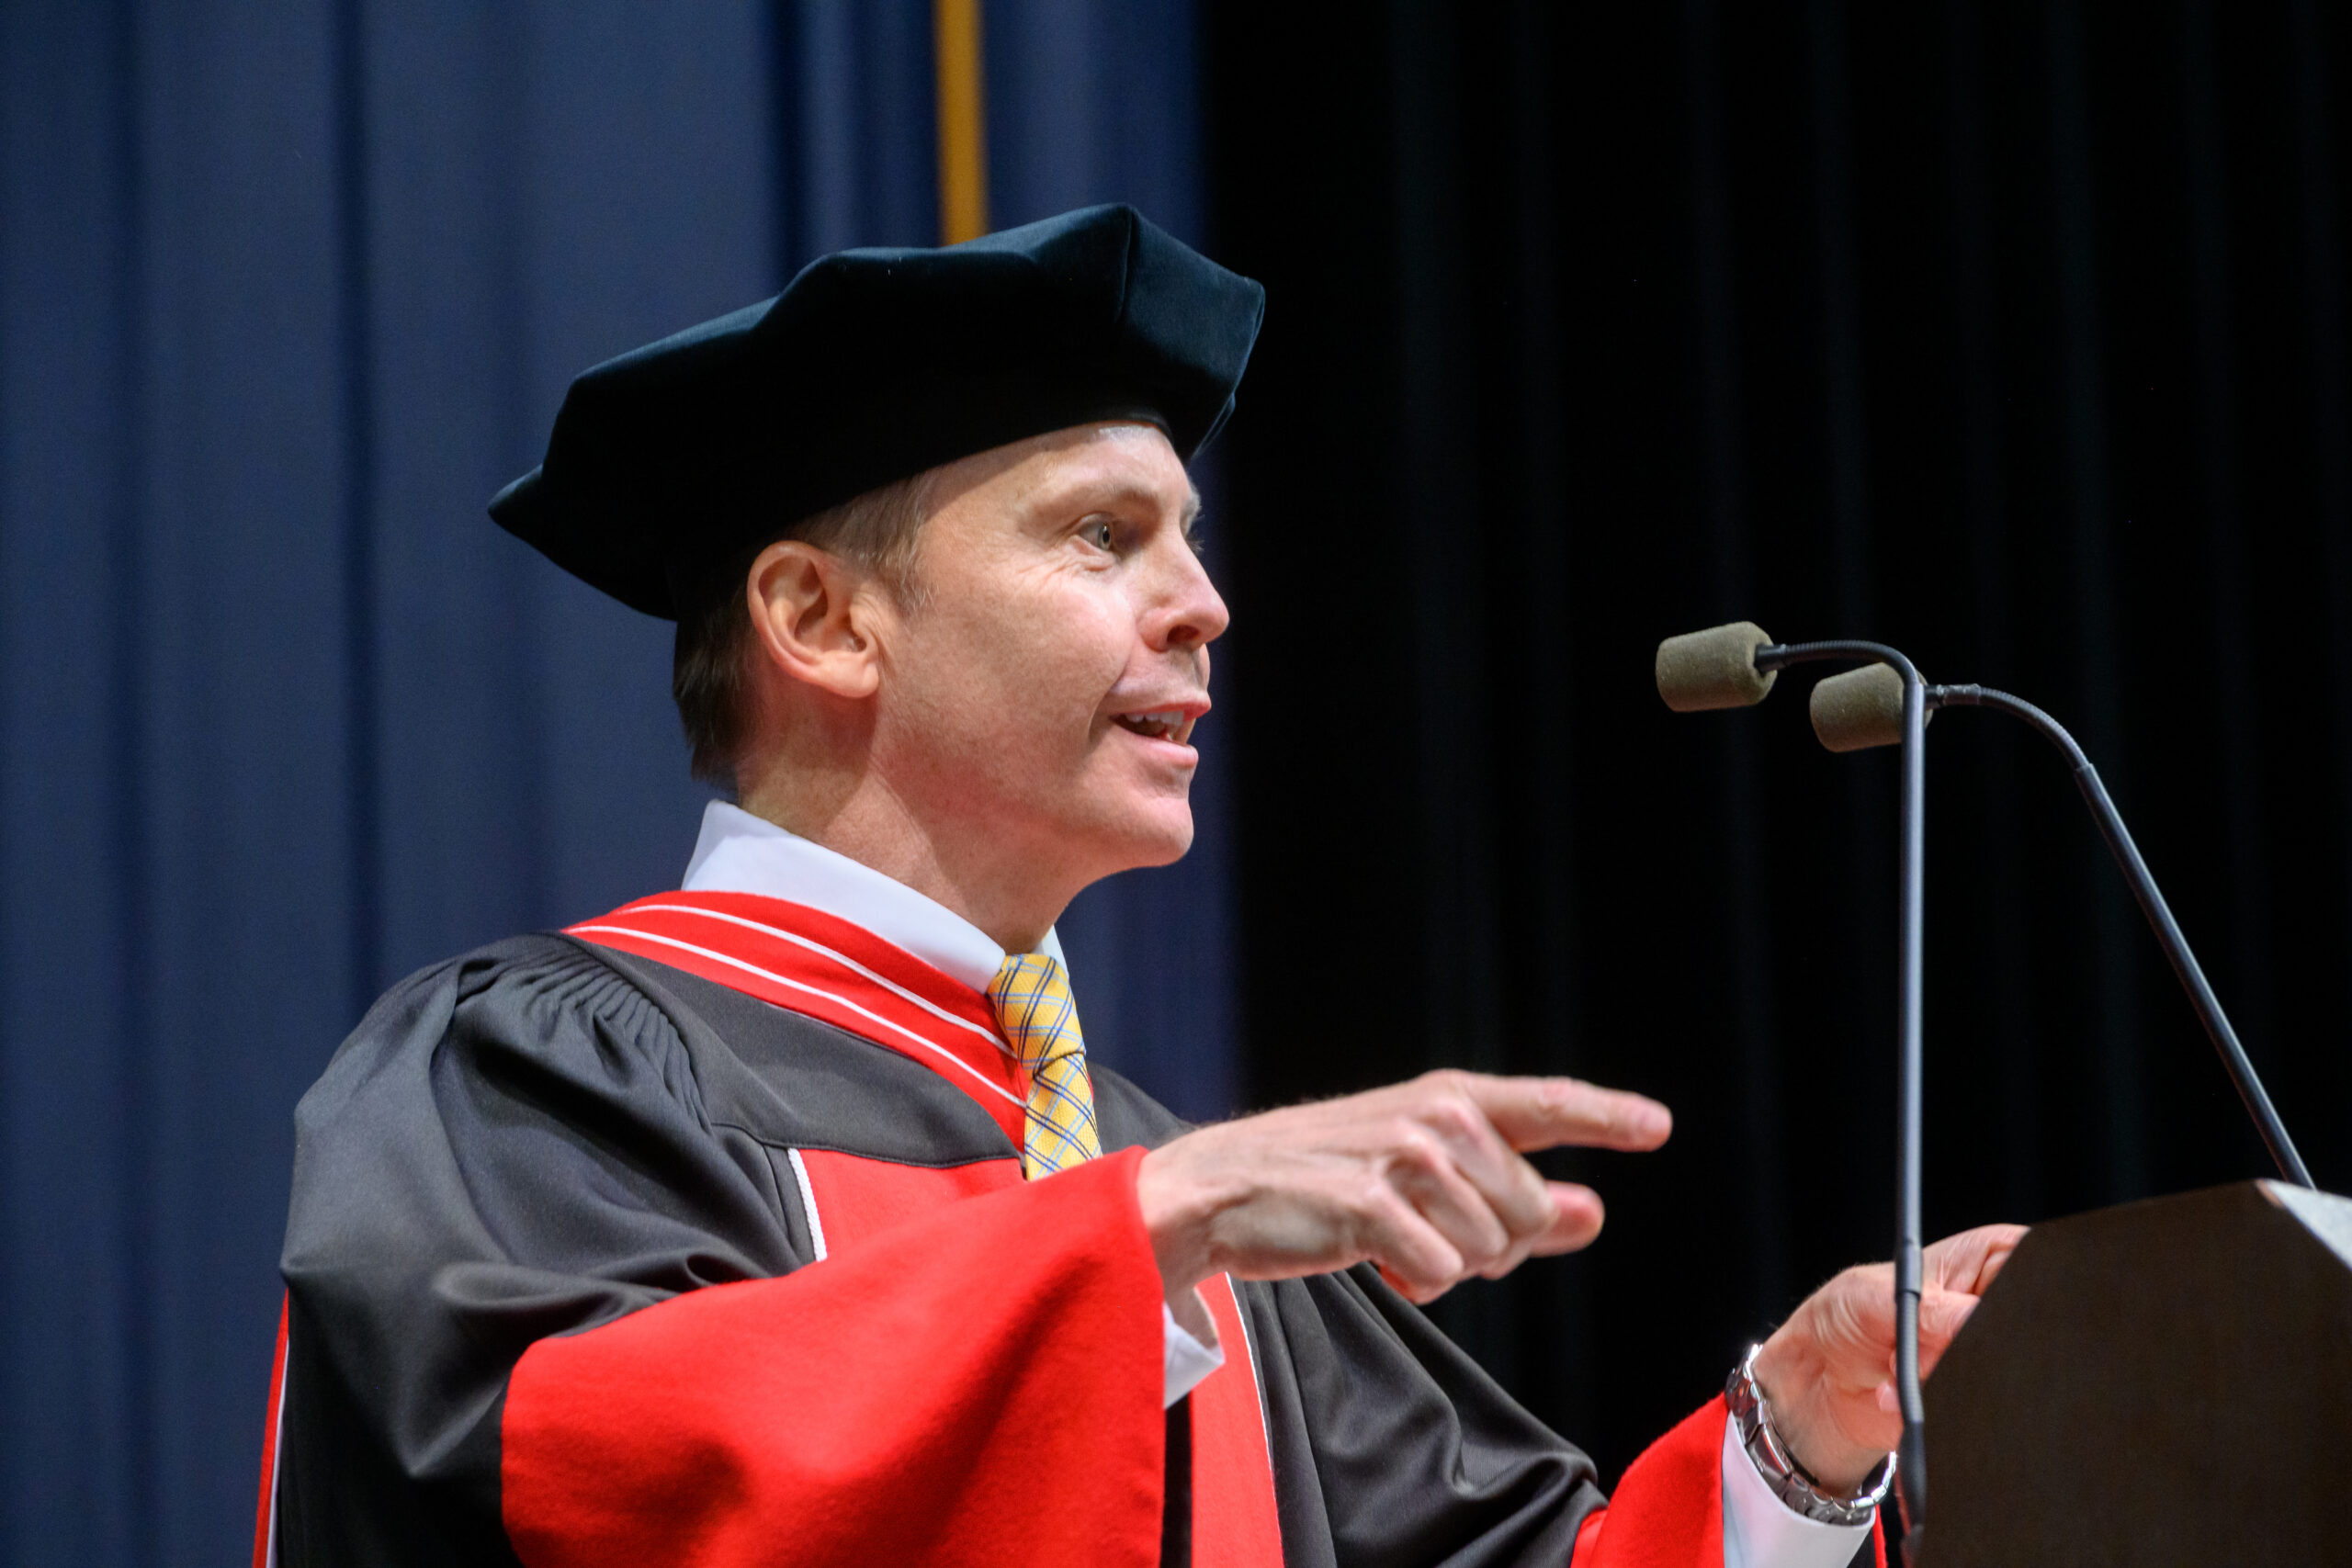 Dean Penfield speaking at Commencement